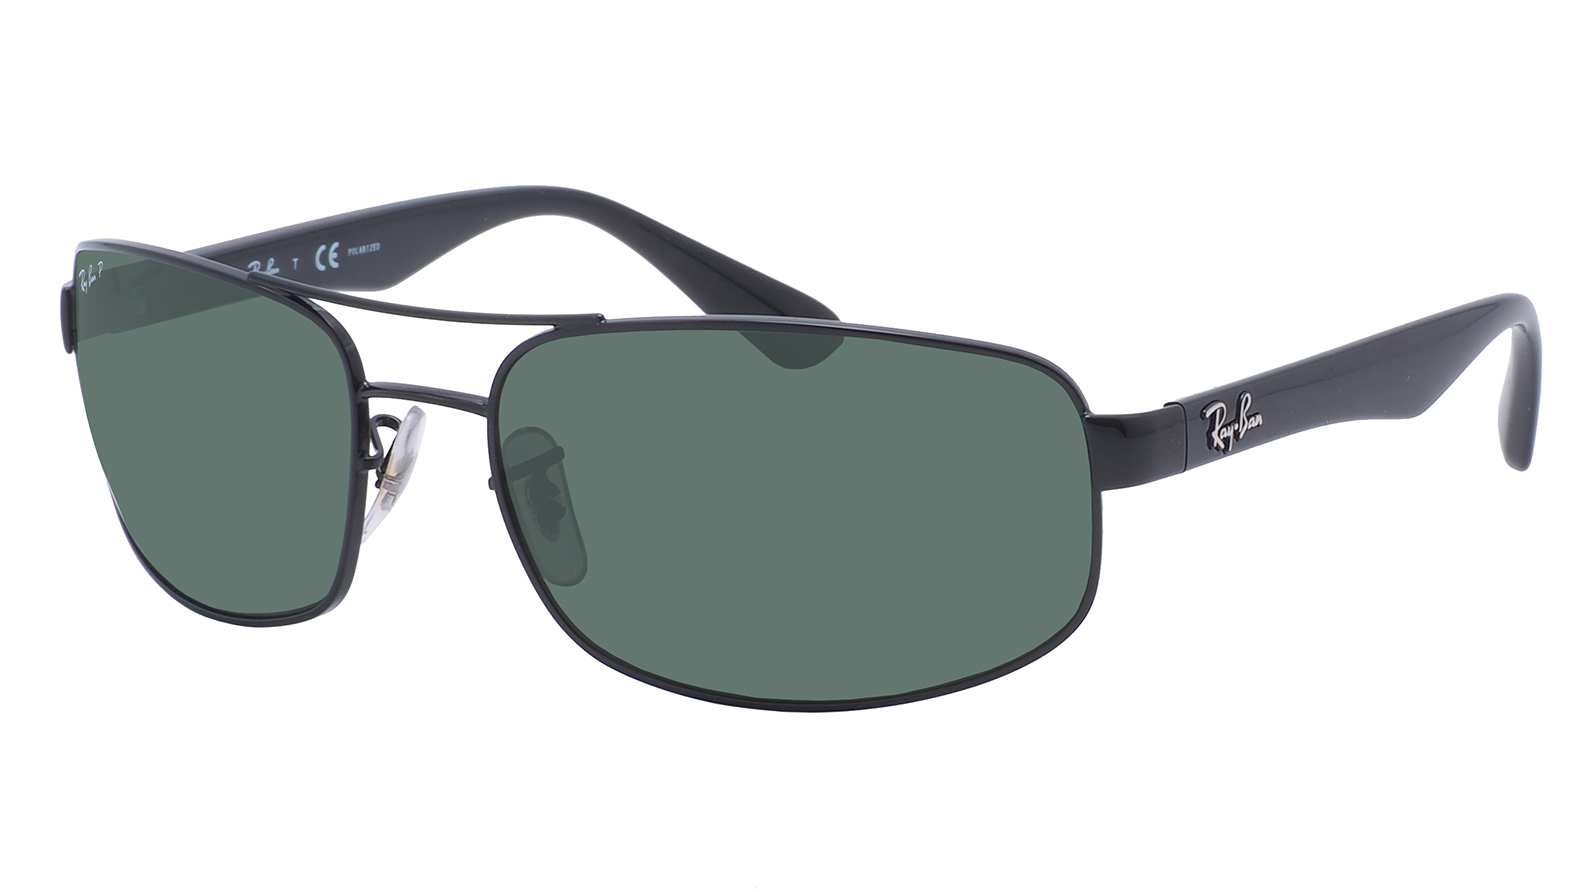 Ray-Ban Active Lifestyle RB 3445 002/58 ray ban active lifestyle rx 6285 2502